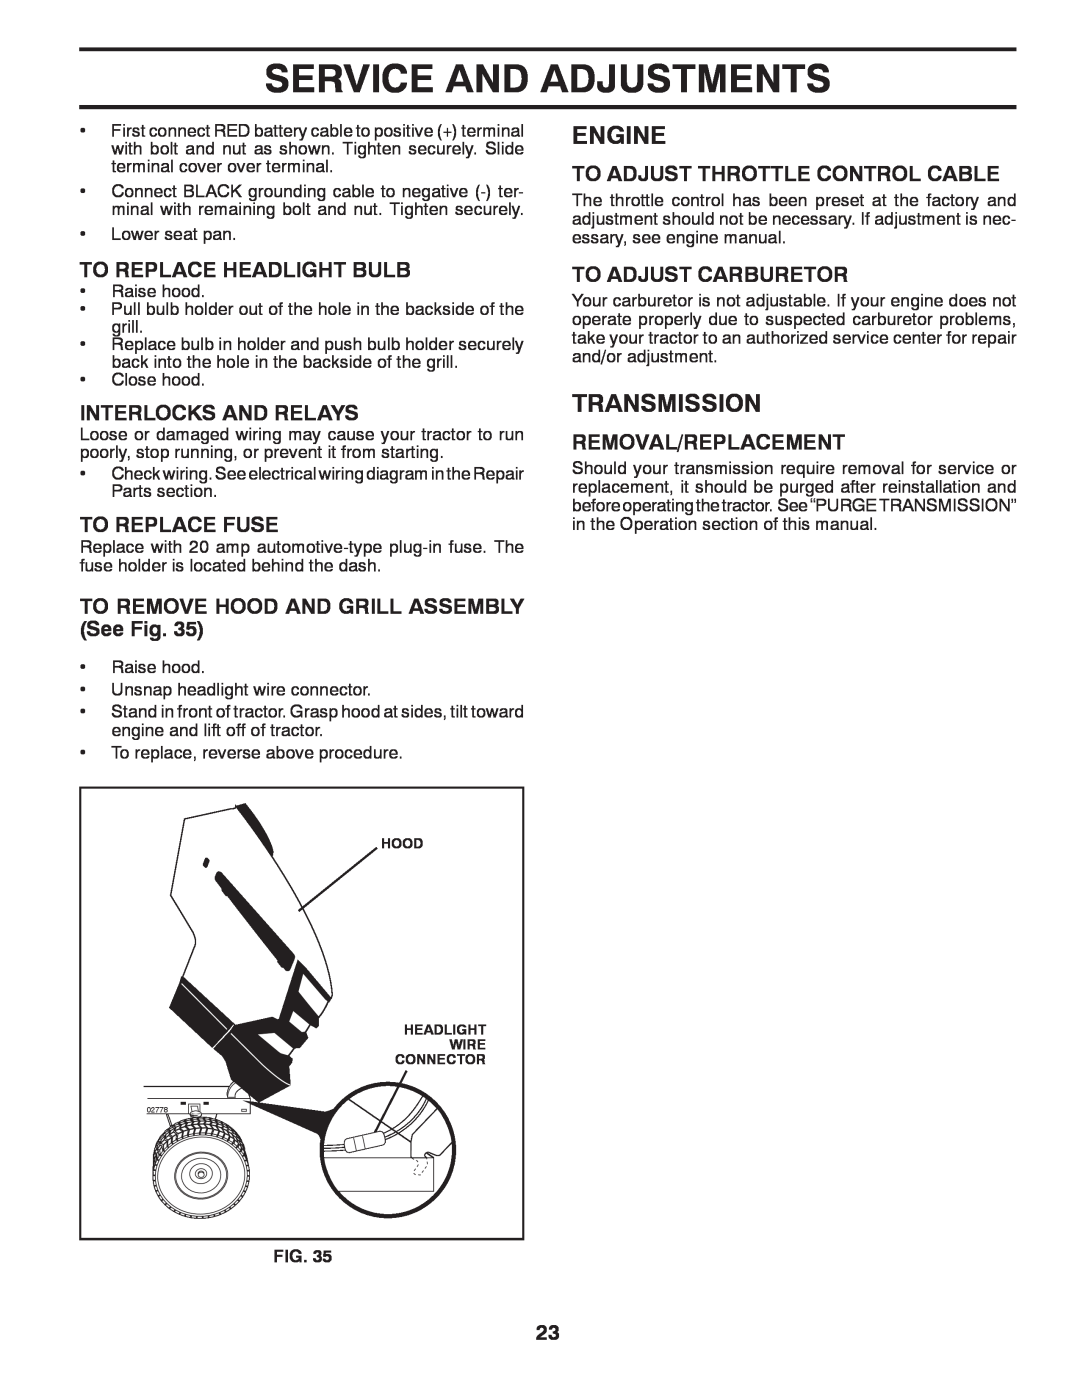 Husqvarna 532 42 84-01 owner manual Transmission, To Replace Headlight Bulb, Interlocks And Relays, To Replace Fuse, Engine 